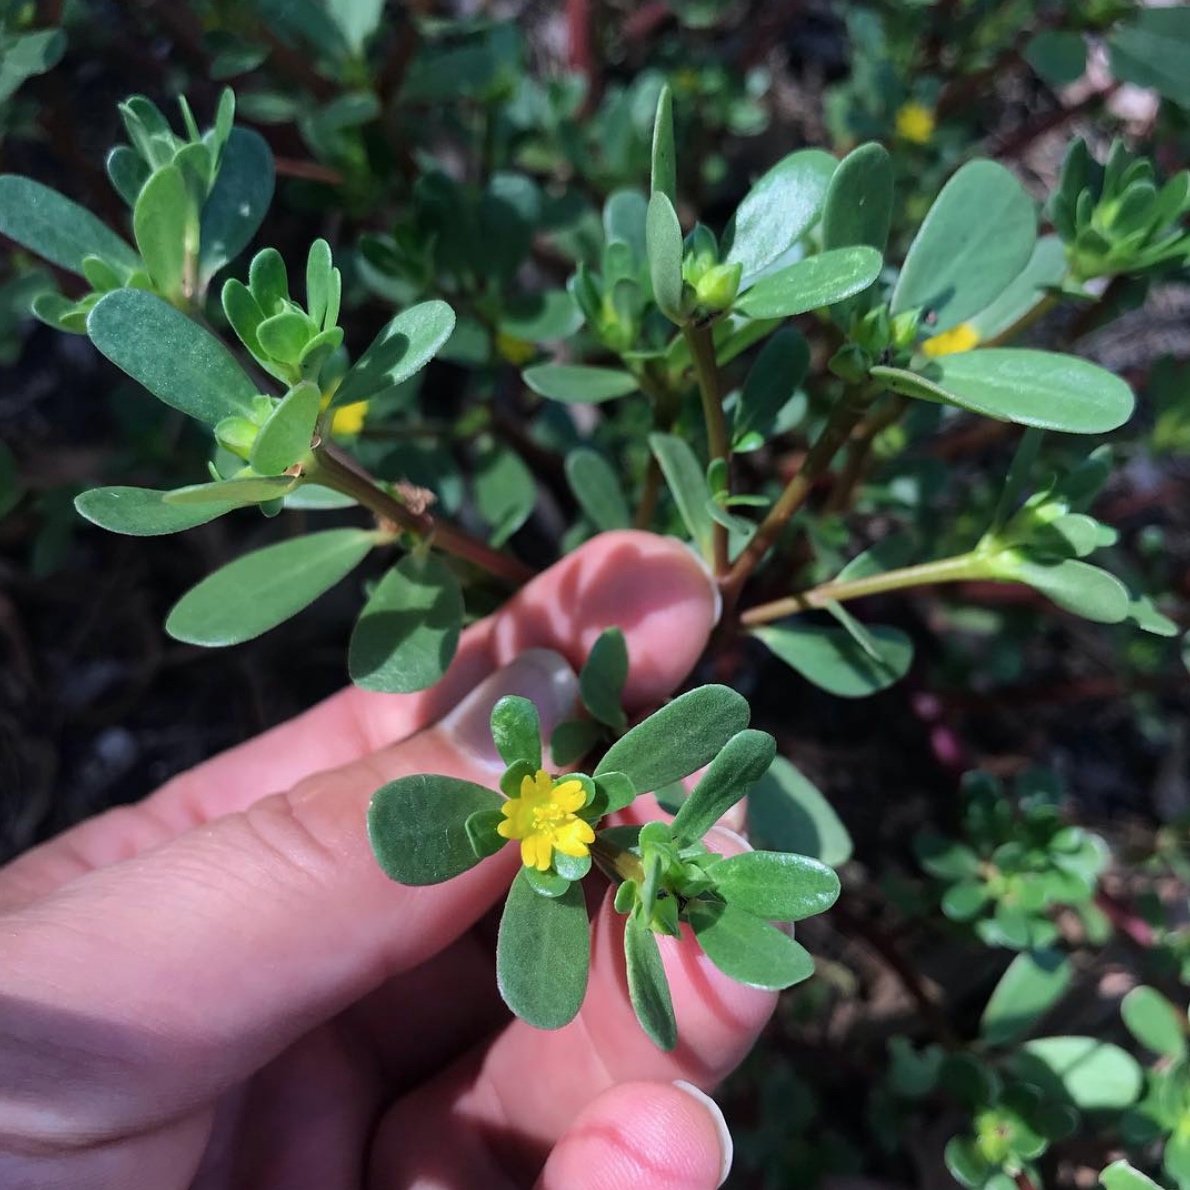 purslane, the summer edible weed that gives so much — wild plants